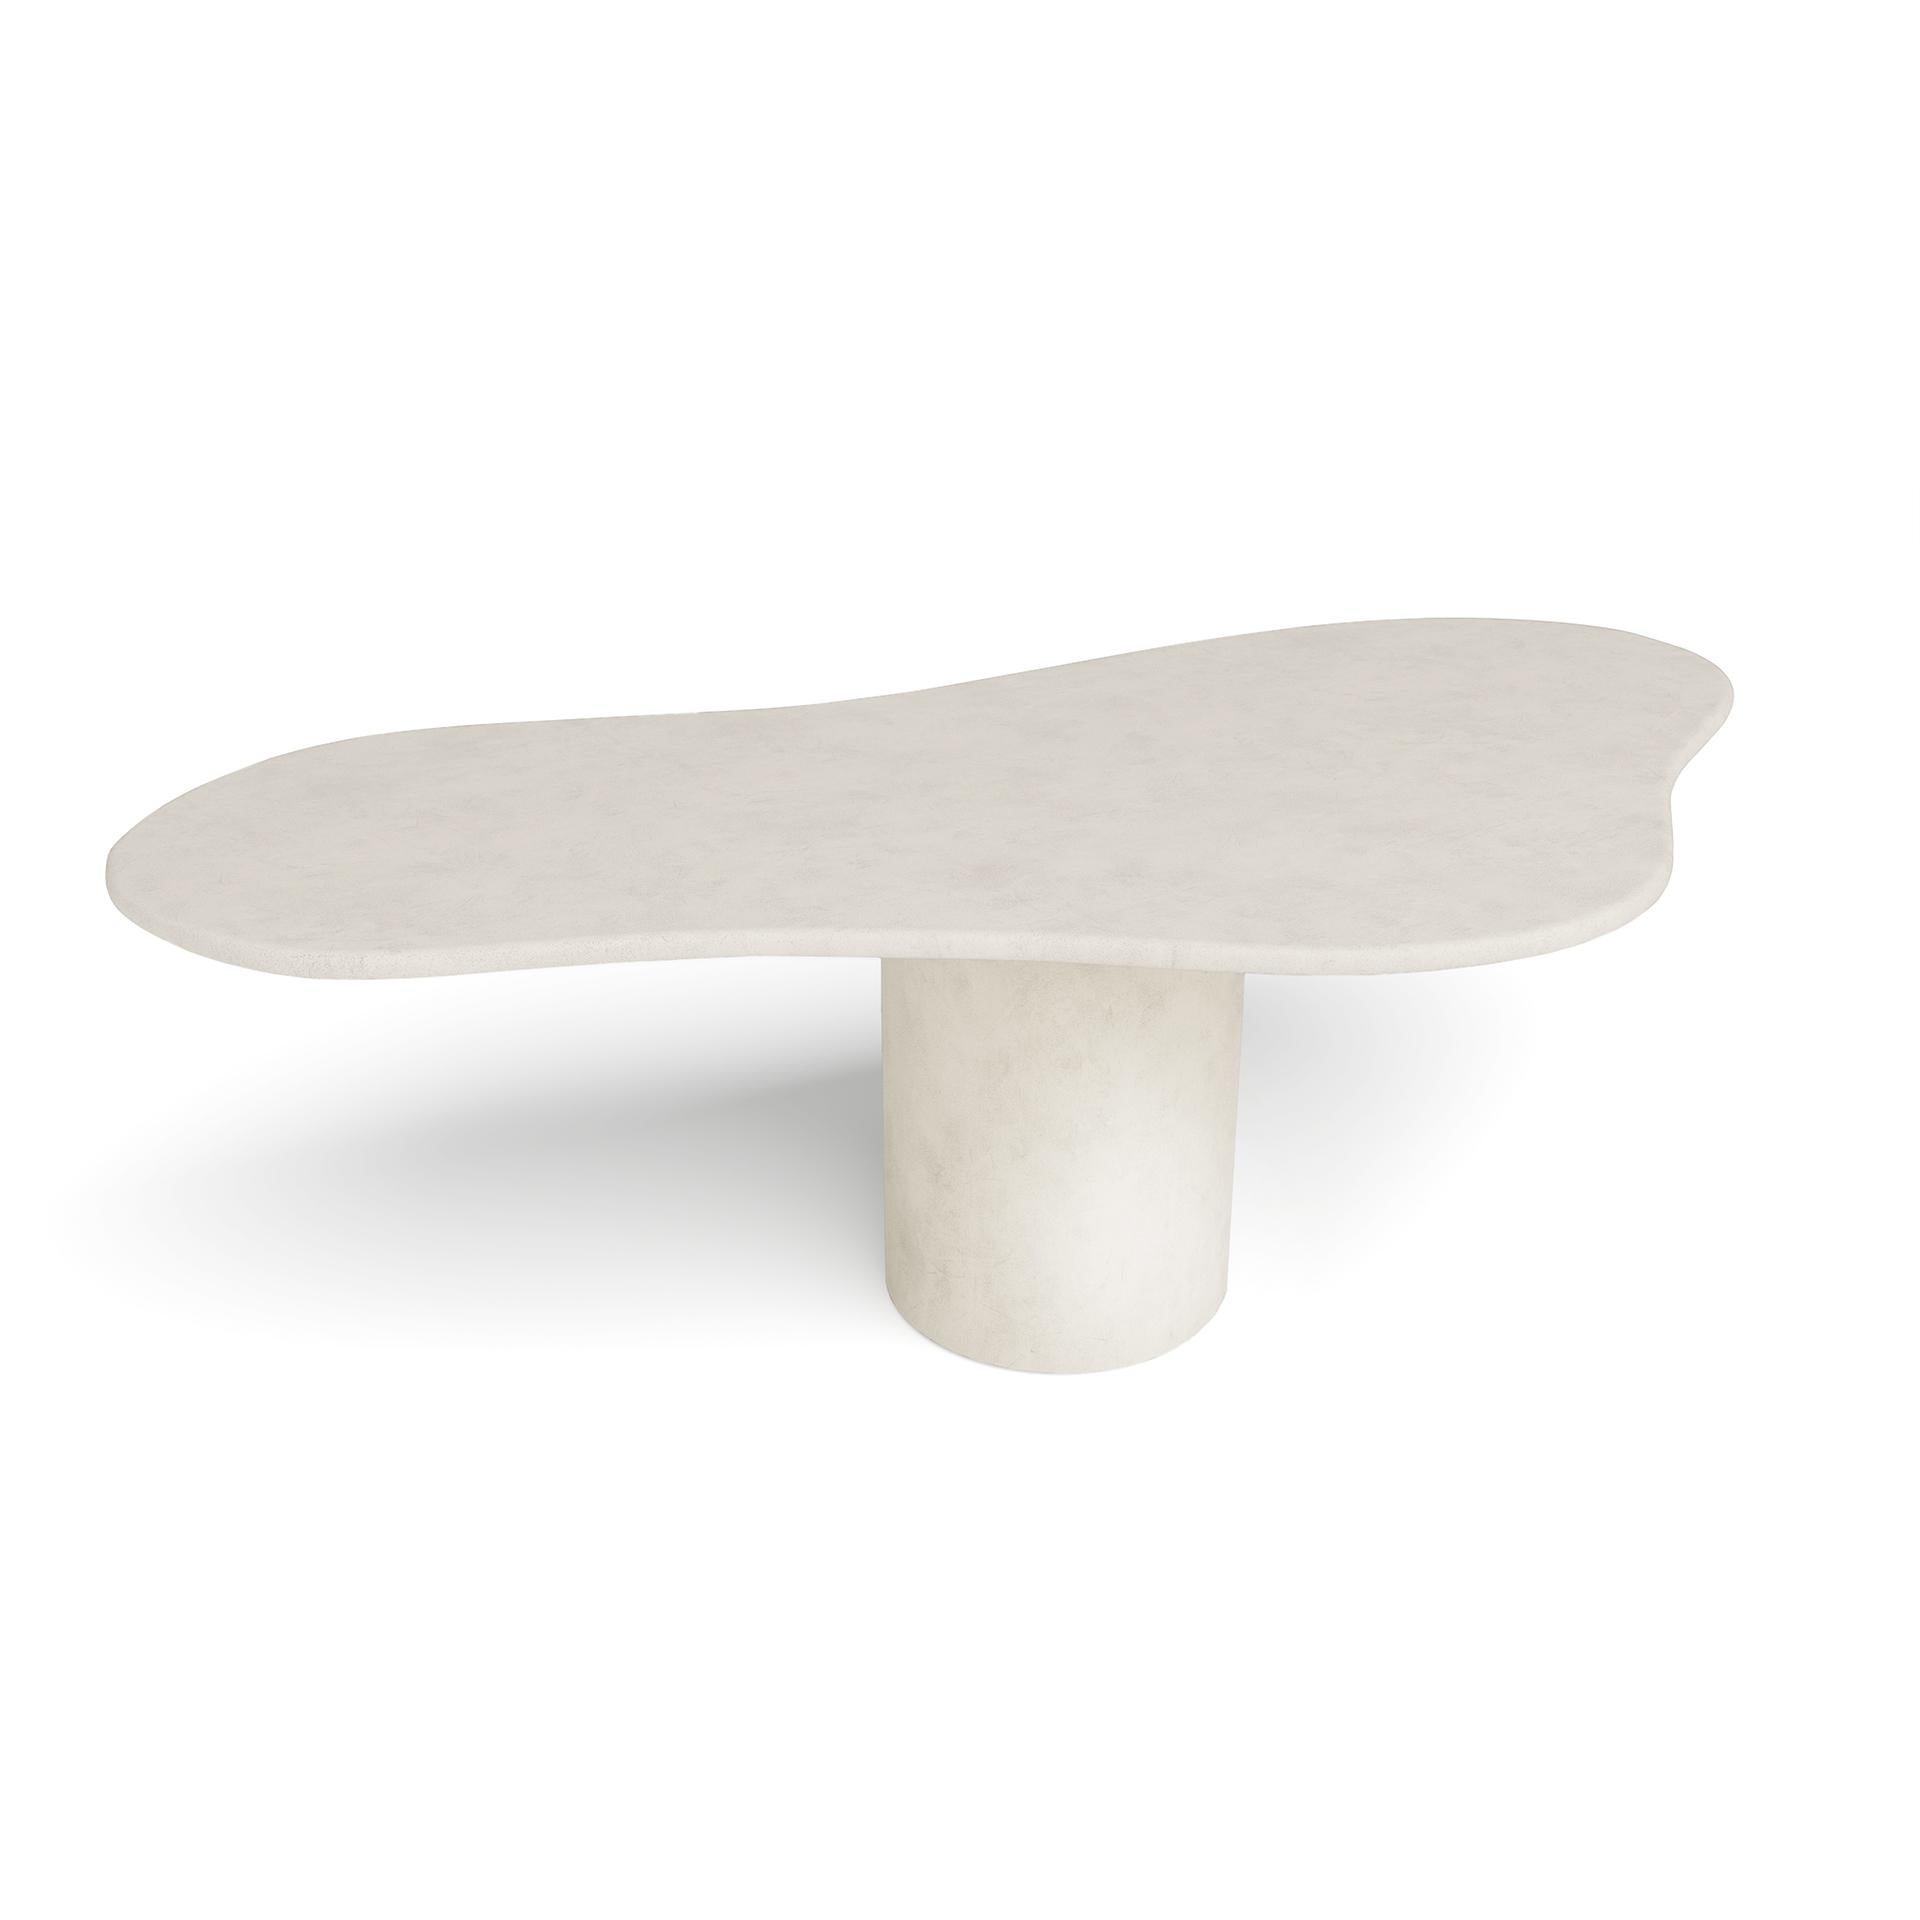 Akemi Dining Table by Kasanai
Dimensions: D 79 x W 160 x H 76 cm.
Materials: Lime plaster.
Also available in different dimensions and colors. Please contact us.

At once fluid and structured, the Akemi table is an artistic talking point for any